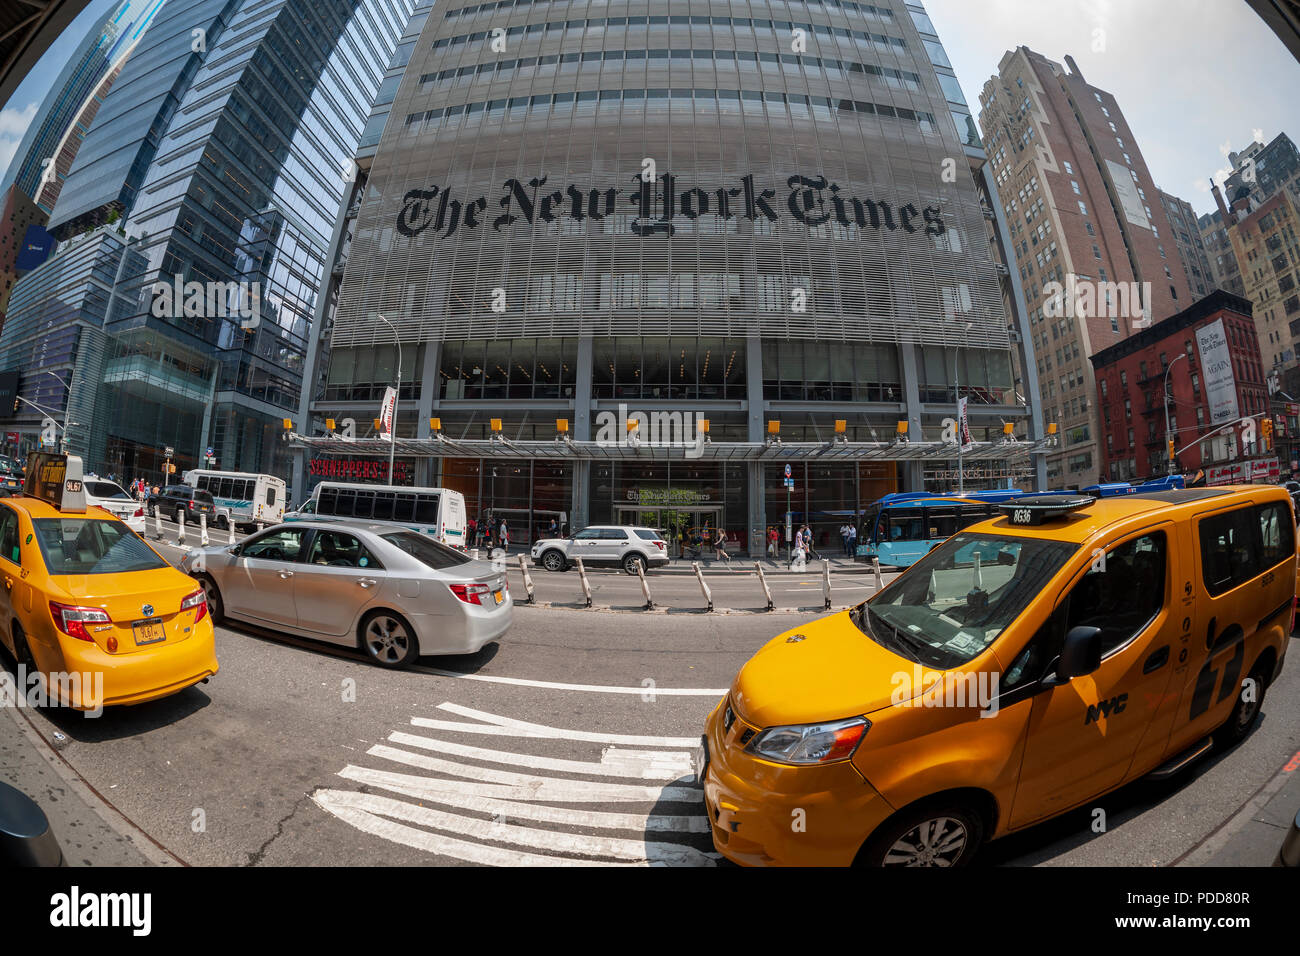 The offices of the the New York Times media empire in Midtown in New York on Tuesday, August 7, 2018. The New York Times is scheduled to report second-quarter earnings on August 8.(Â© Richard B. Levine) Stock Photo